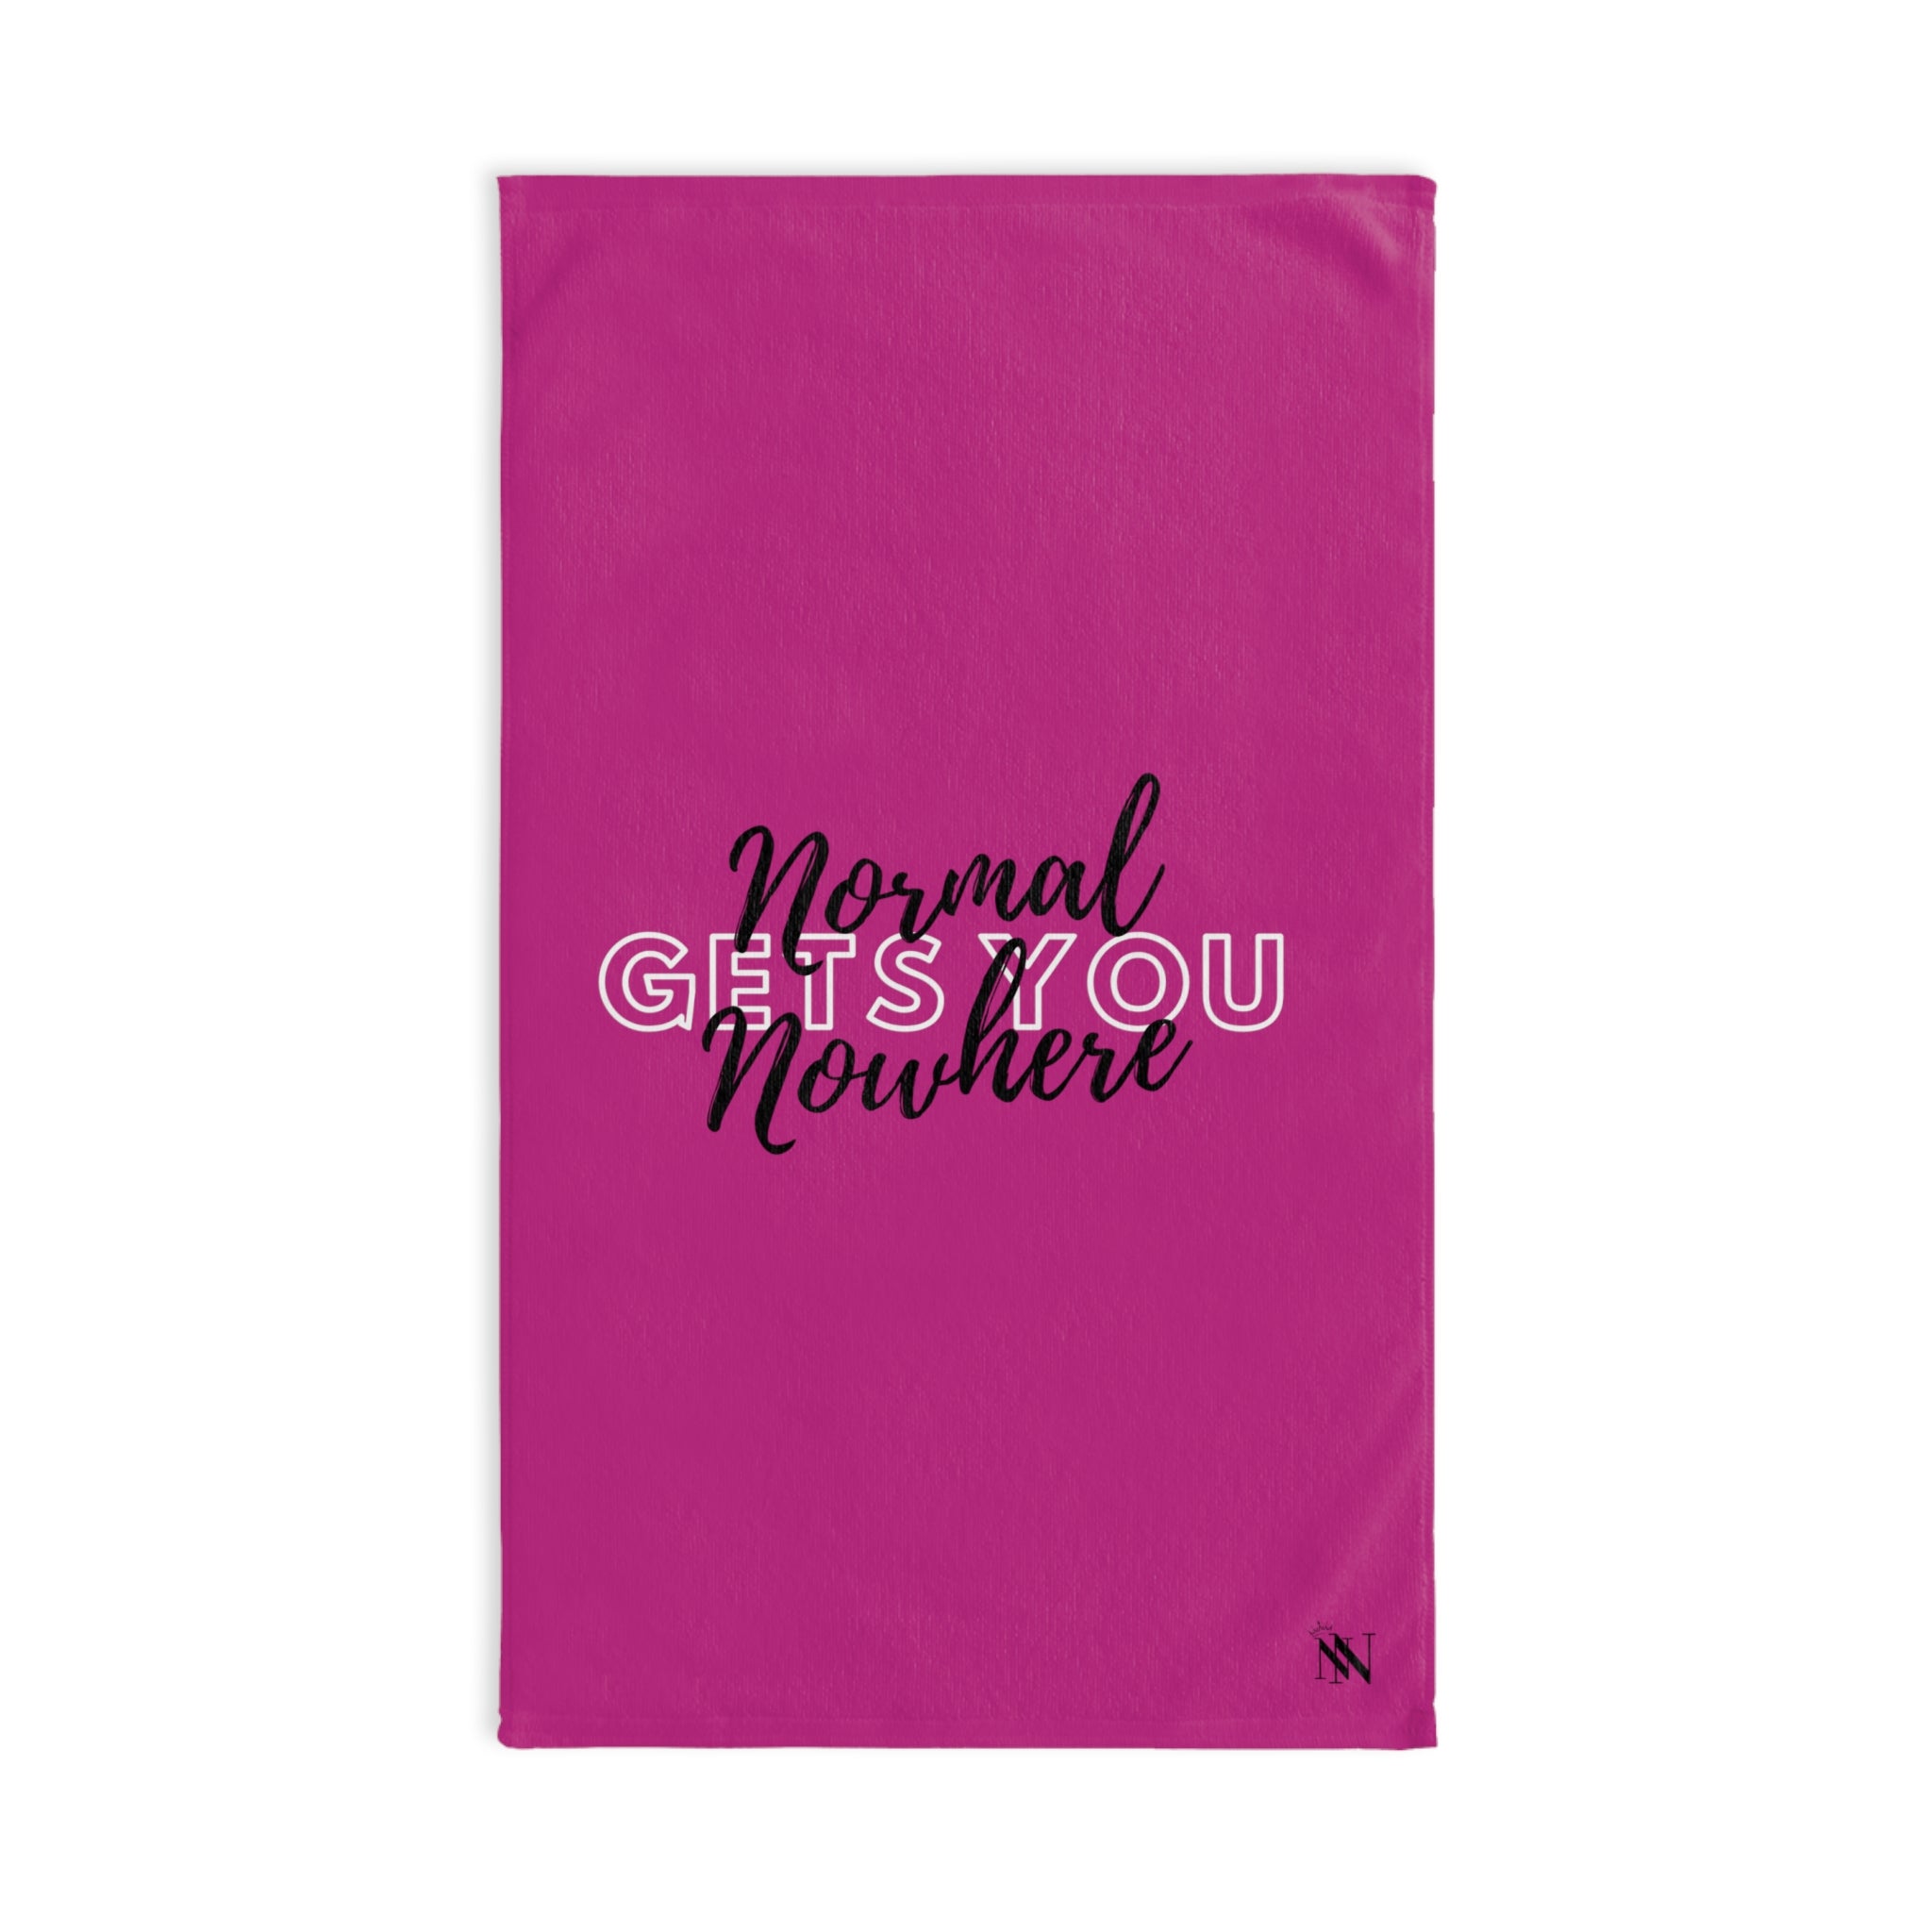 Normal Nowhere Fuscia | Funny Gifts for Men - Gifts for Him - Birthday Gifts for Men, Him, Husband, Boyfriend, New Couple Gifts, Fathers & Valentines Day Gifts, Hand Towels NECTAR NAPKINS